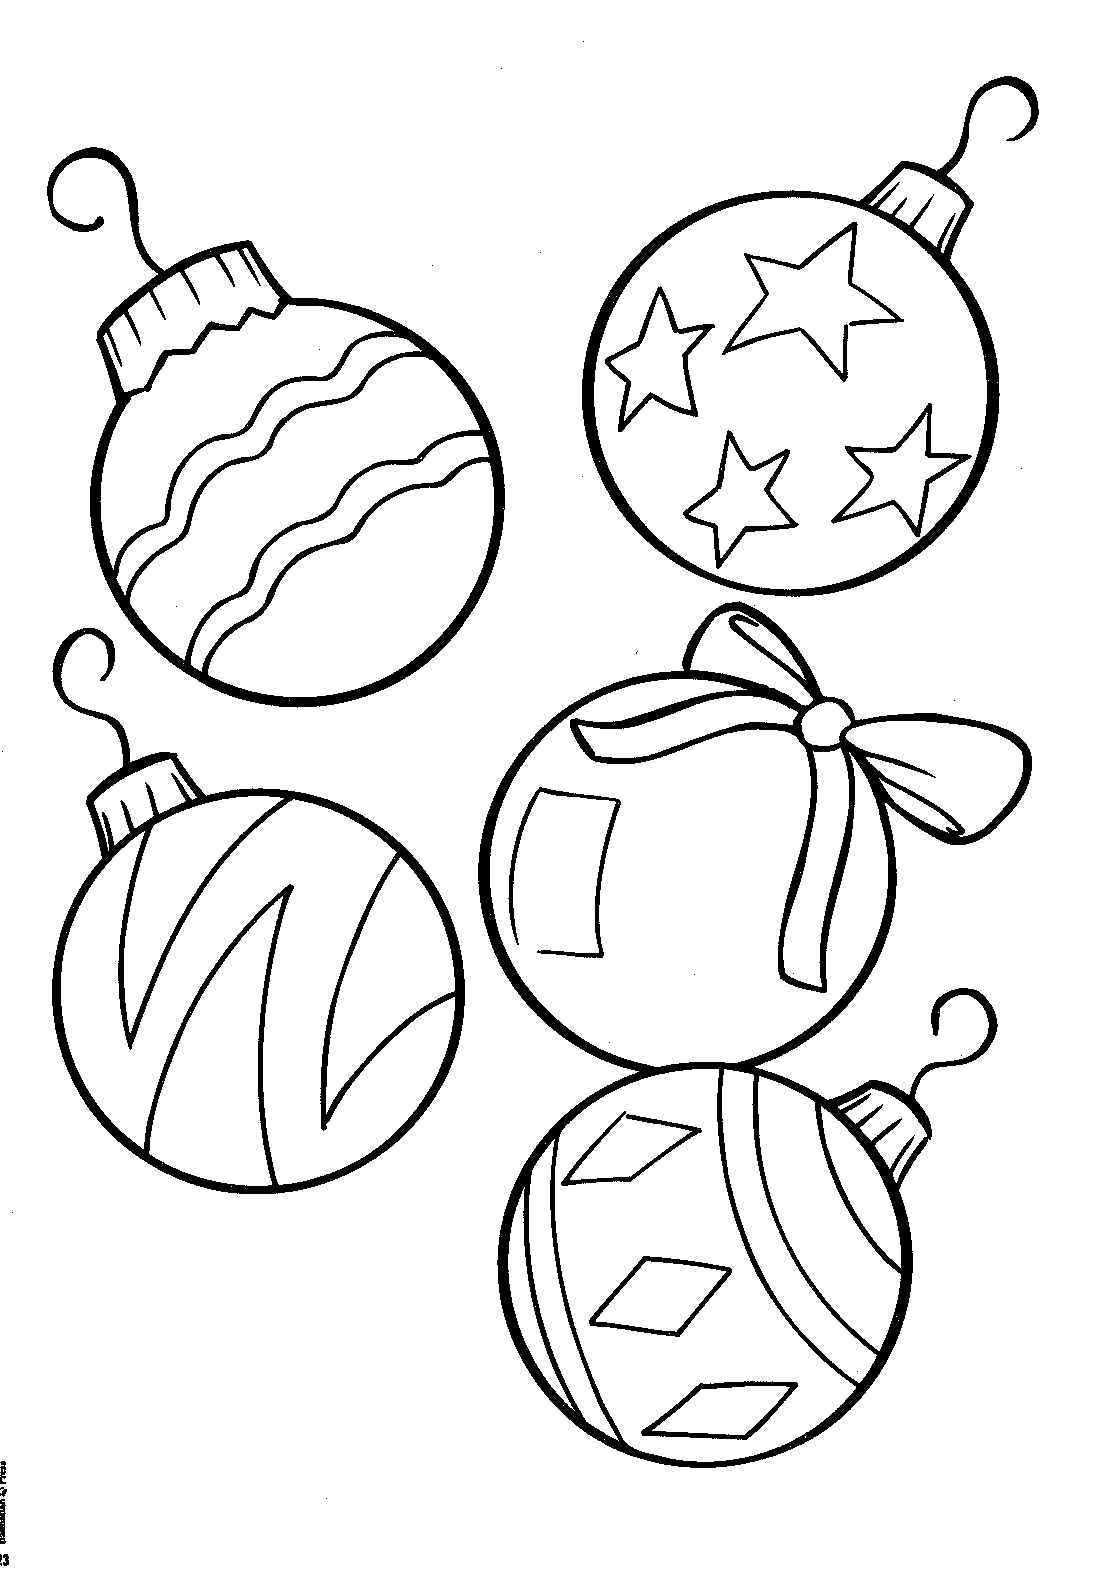 Christmas Ornament Coloring Page   High Quality Coloring Pages ...